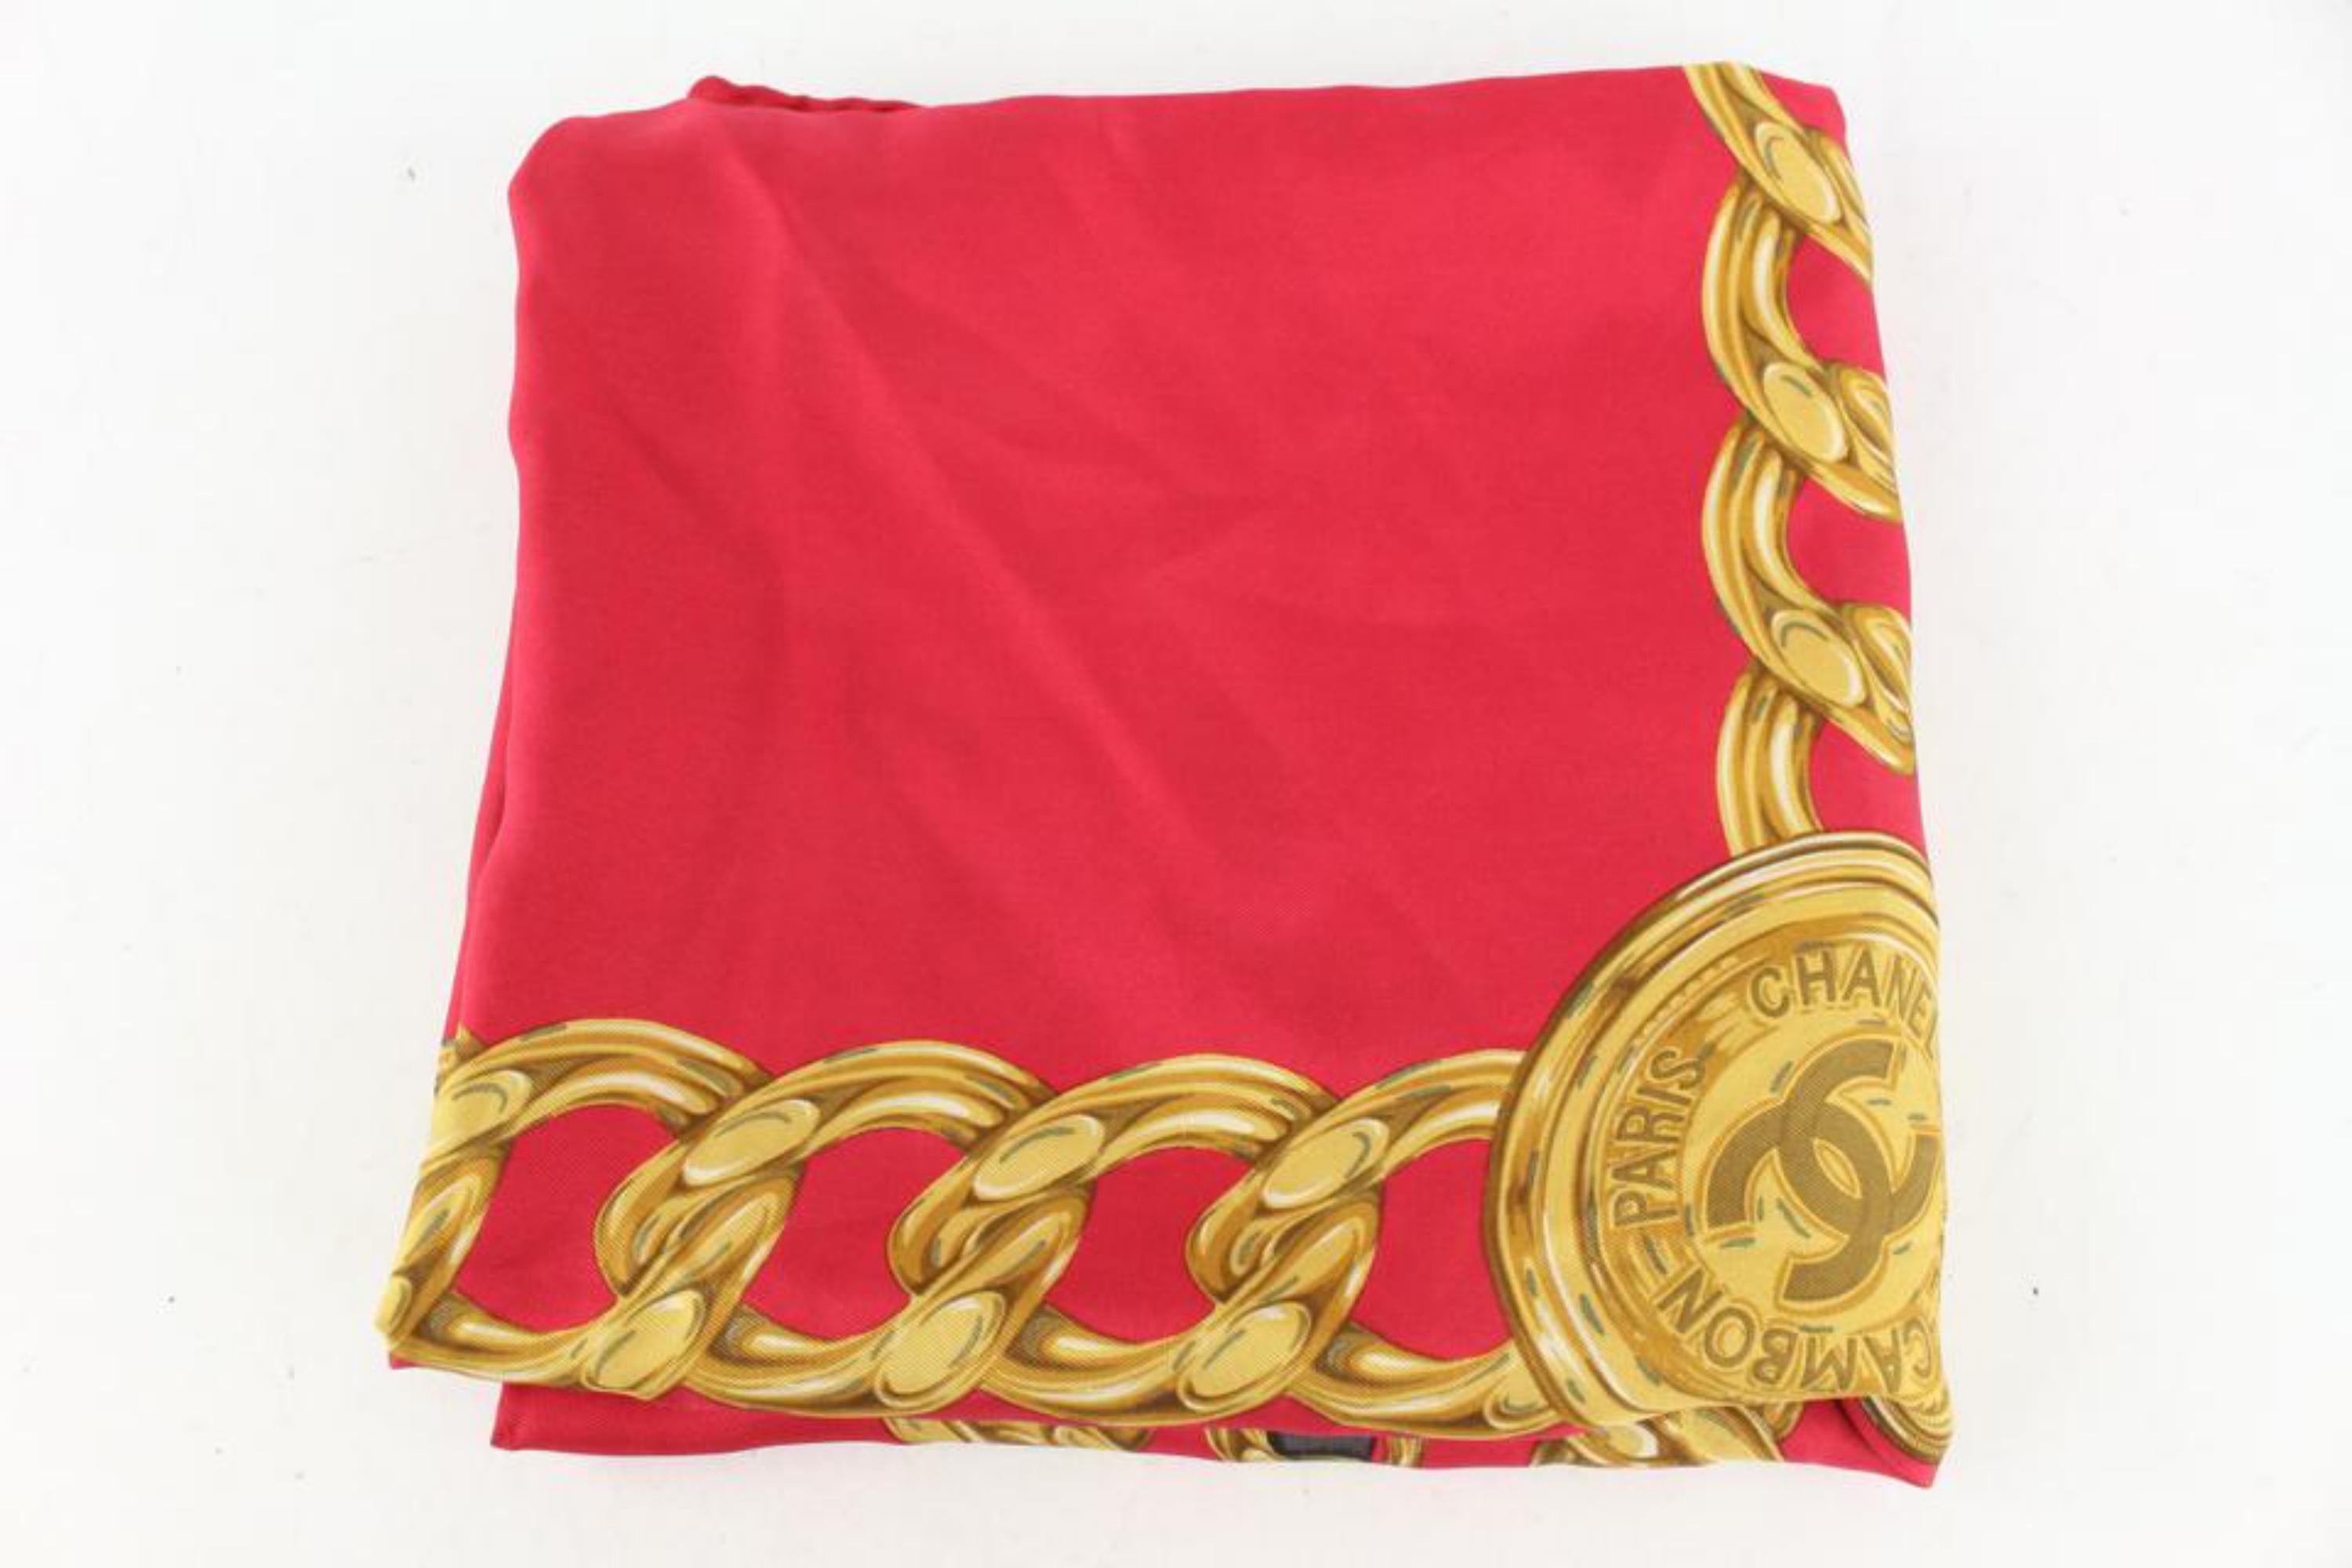 Chanel Red x Black x Gold Chain CC Belt Silk Scarf 112c29 In Good Condition For Sale In Dix hills, NY